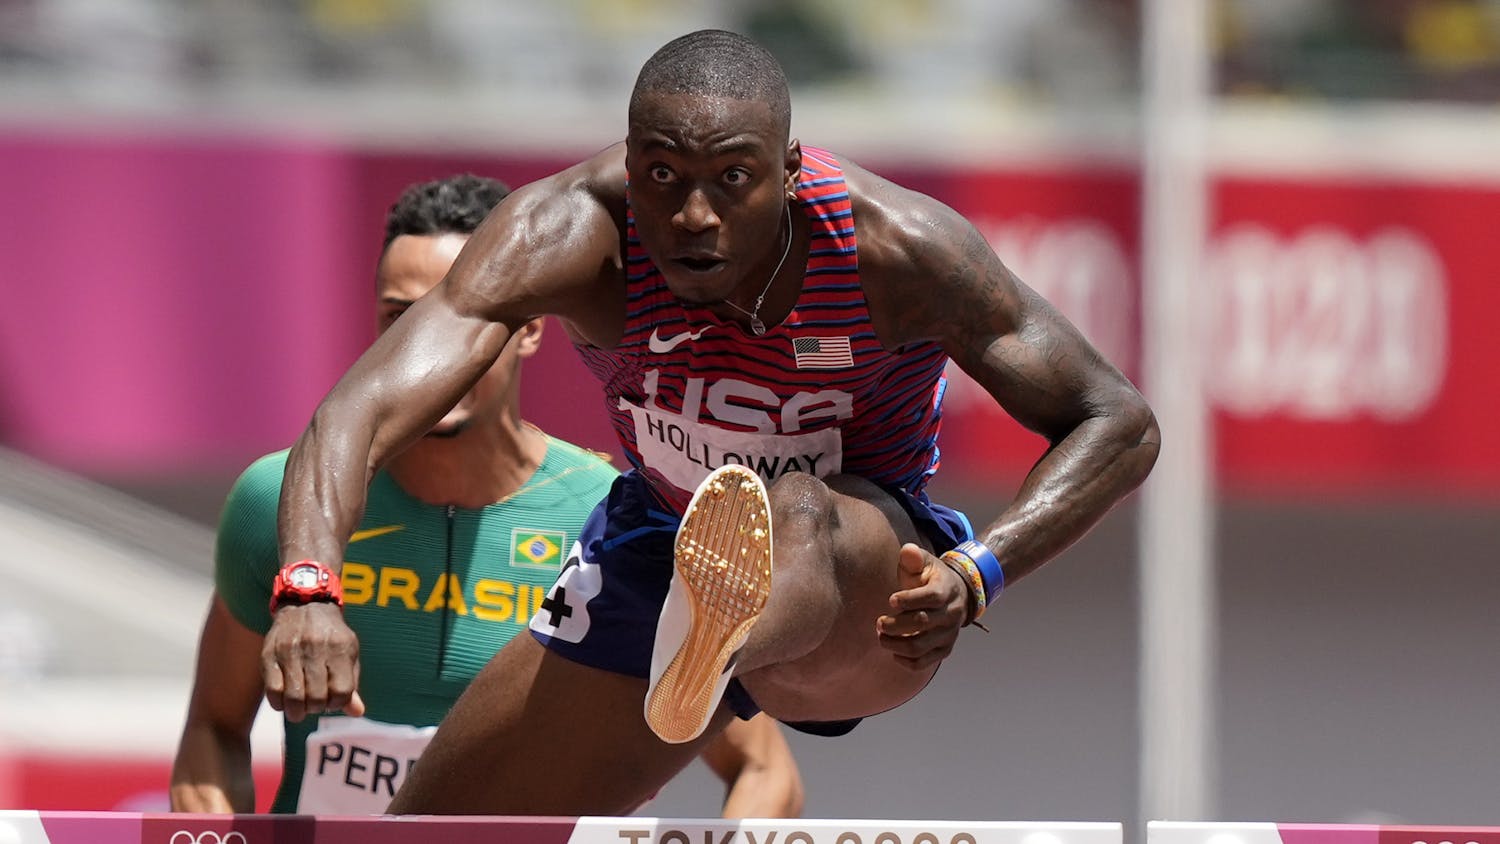 Grant Holloway, of United States competes in a men's 110-meter hurdles semifinal at the 2020 Summer Olympics, Wednesday, Aug. 4, 2021, in Tokyo, Japan. (AP Photo/Martin Meissner)